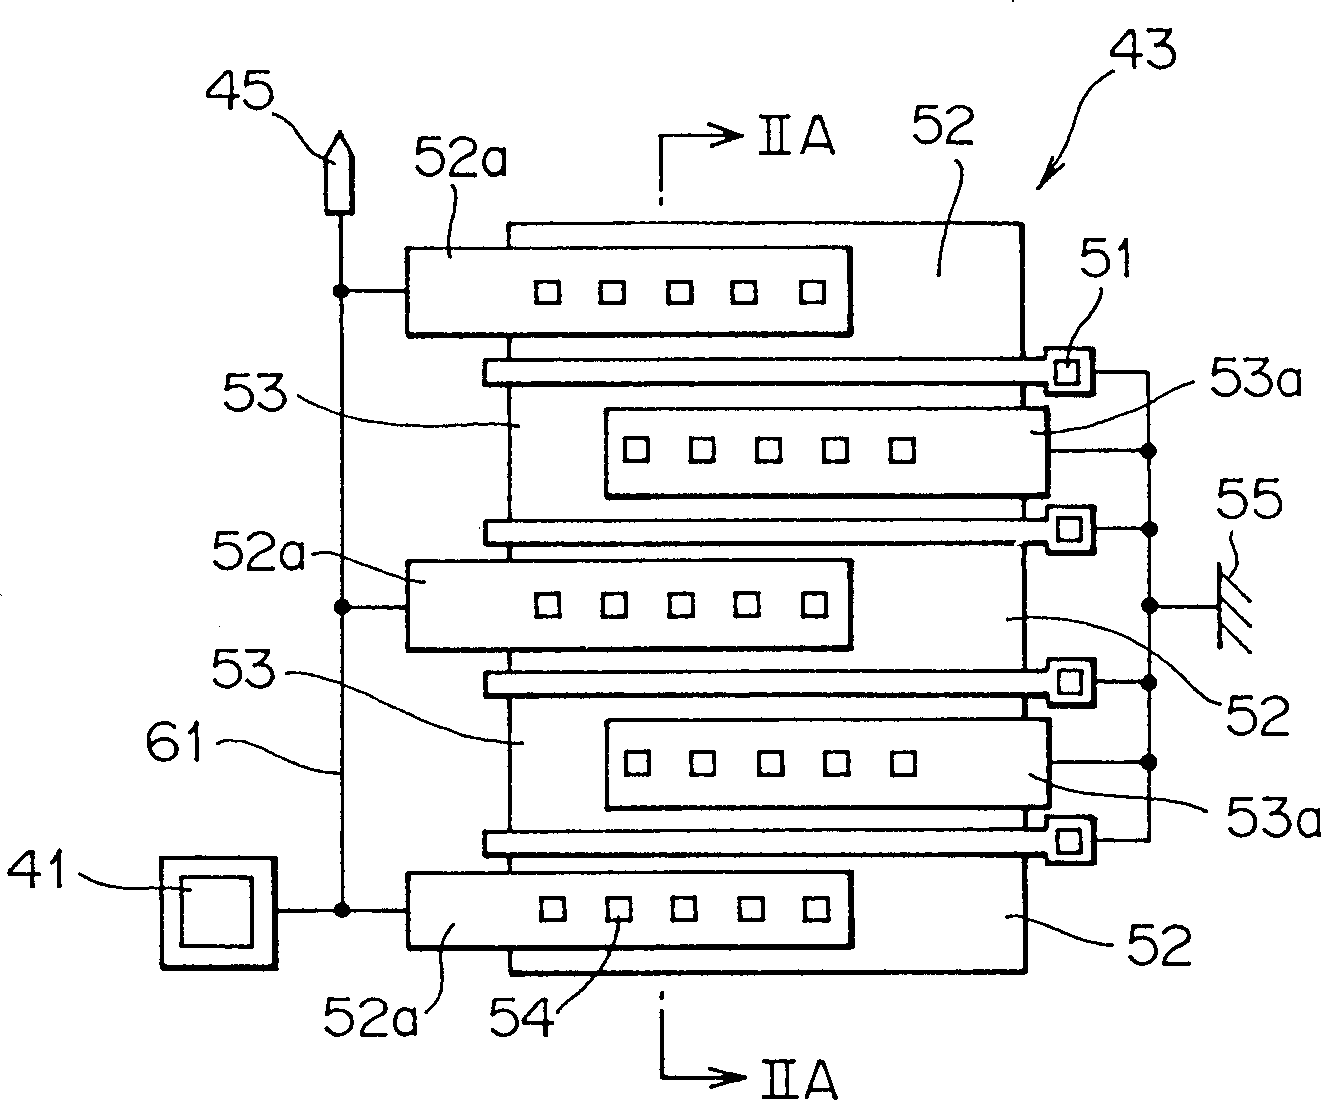 Semiconductor device having protection circuit